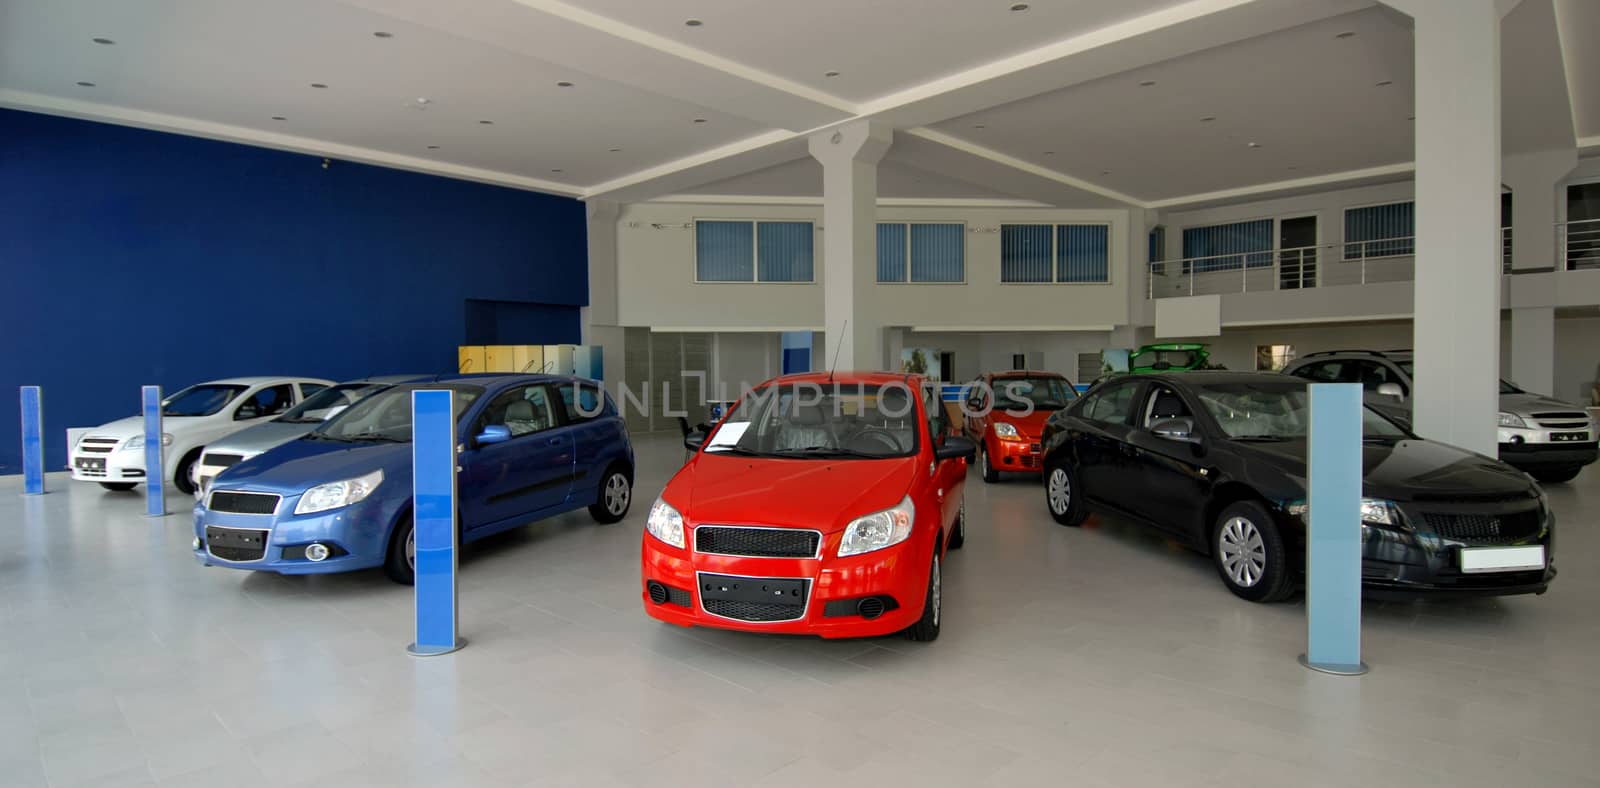 New cars are in showroom